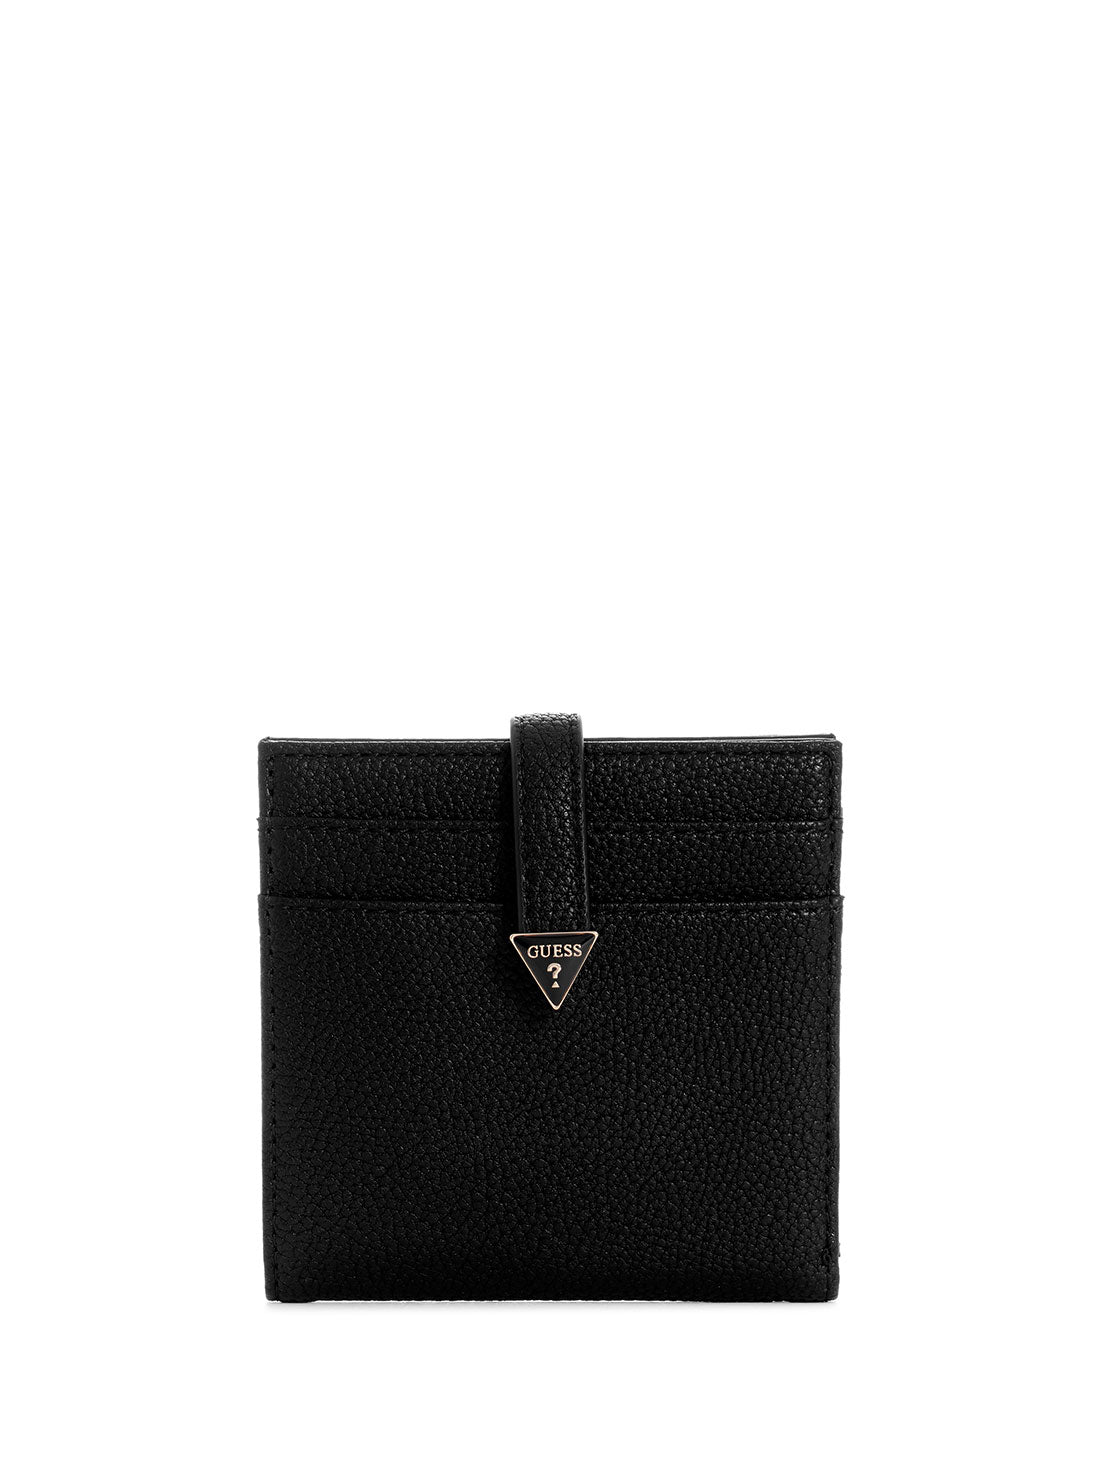 GUESS Black Laurel Small Card Case  front view